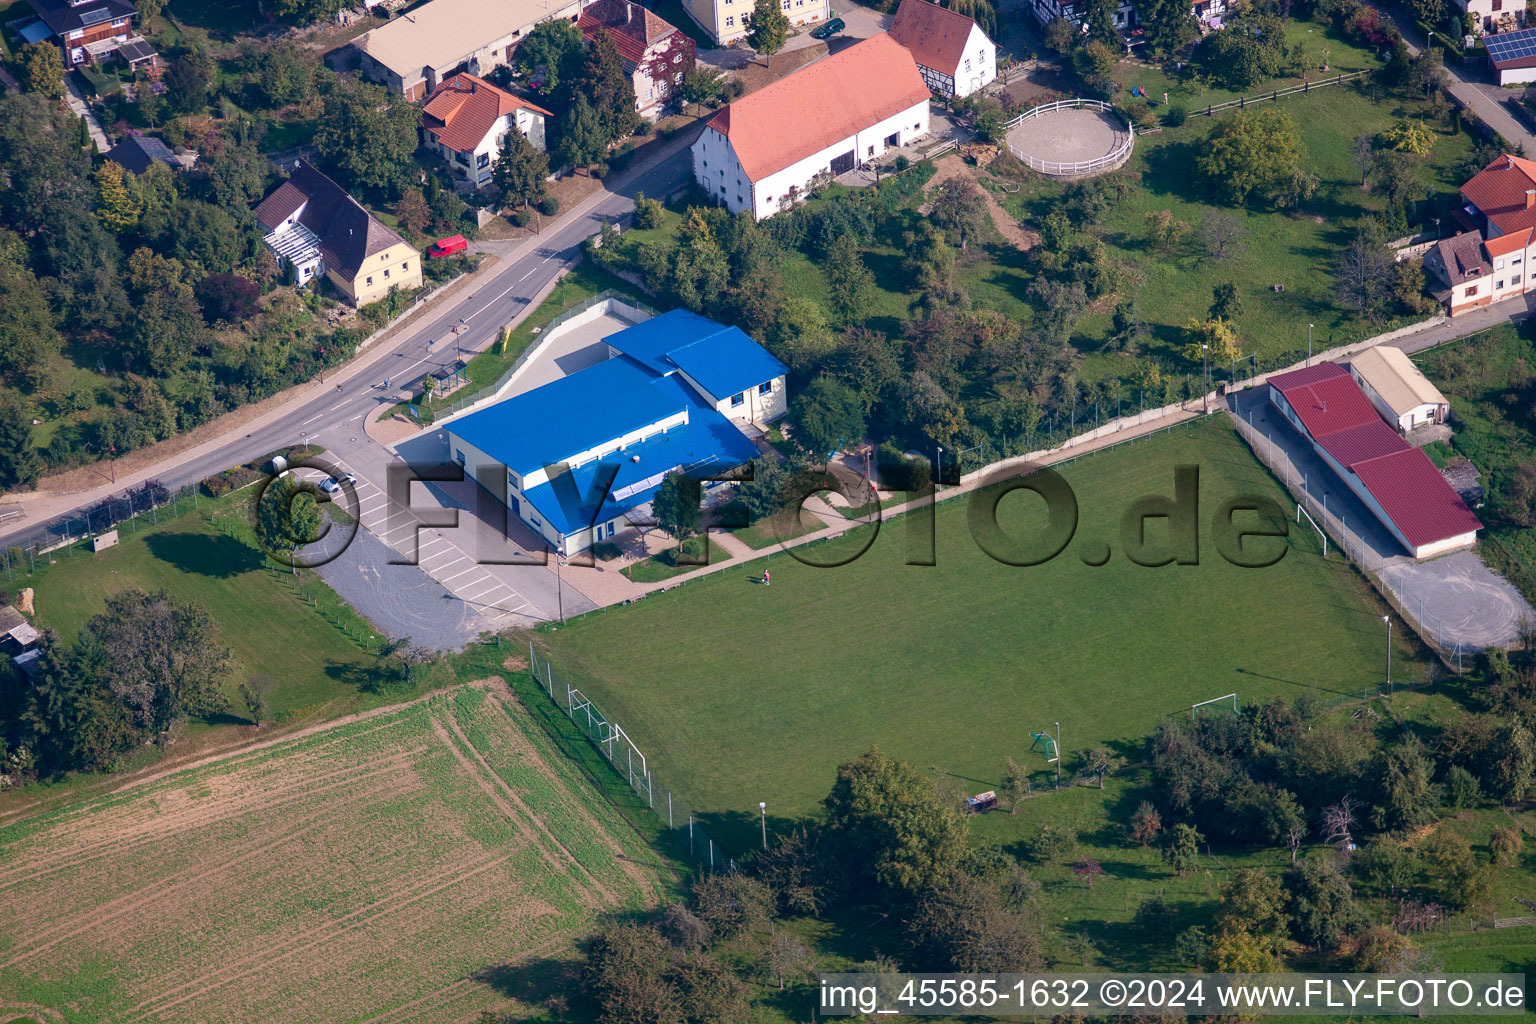 Aerial view of Multi-purpose hall in the district Adersbach in Sinsheim in the state Baden-Wuerttemberg, Germany